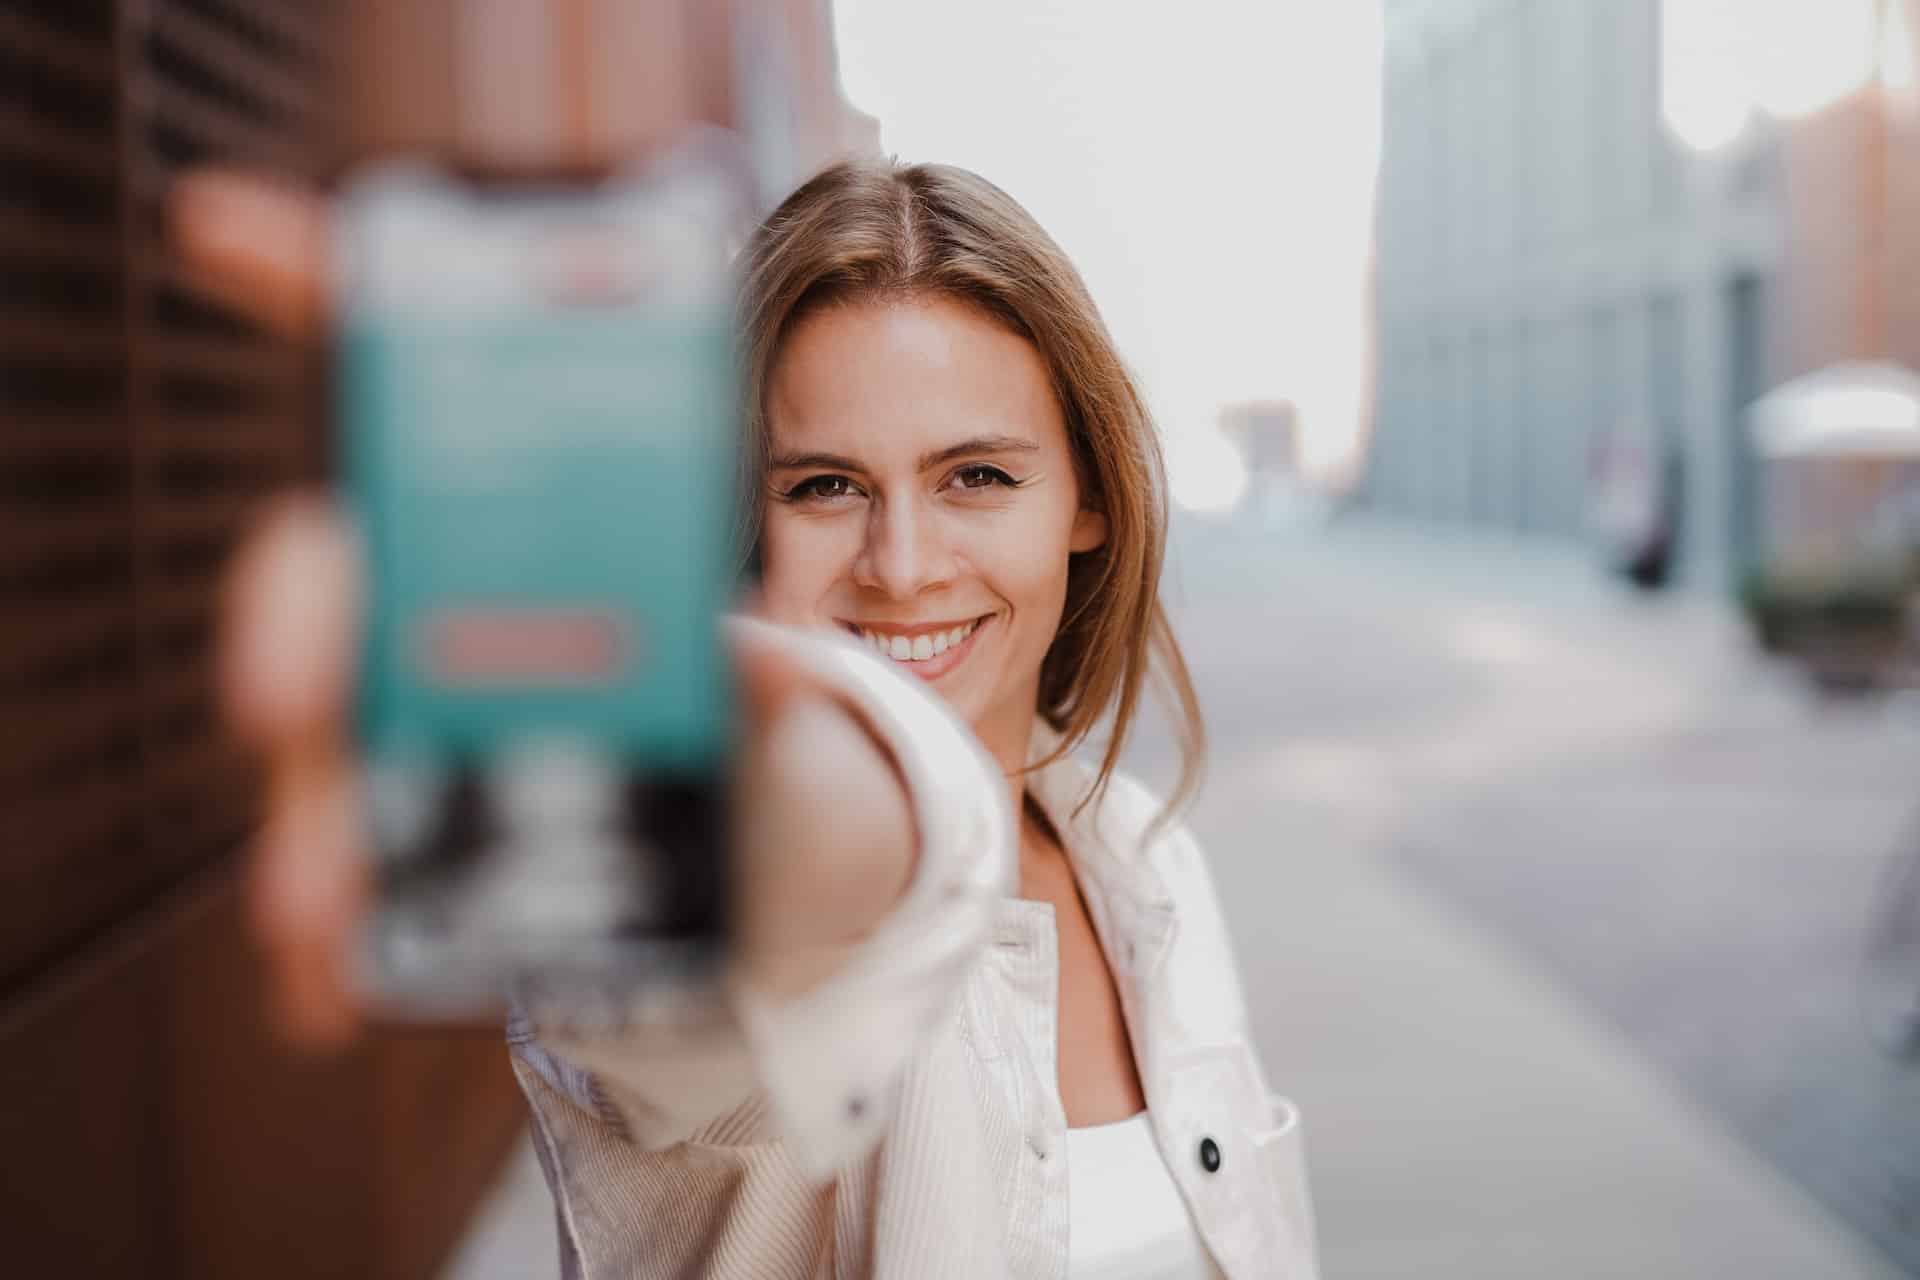 Smiling woman showing her mobile phone to the camera.